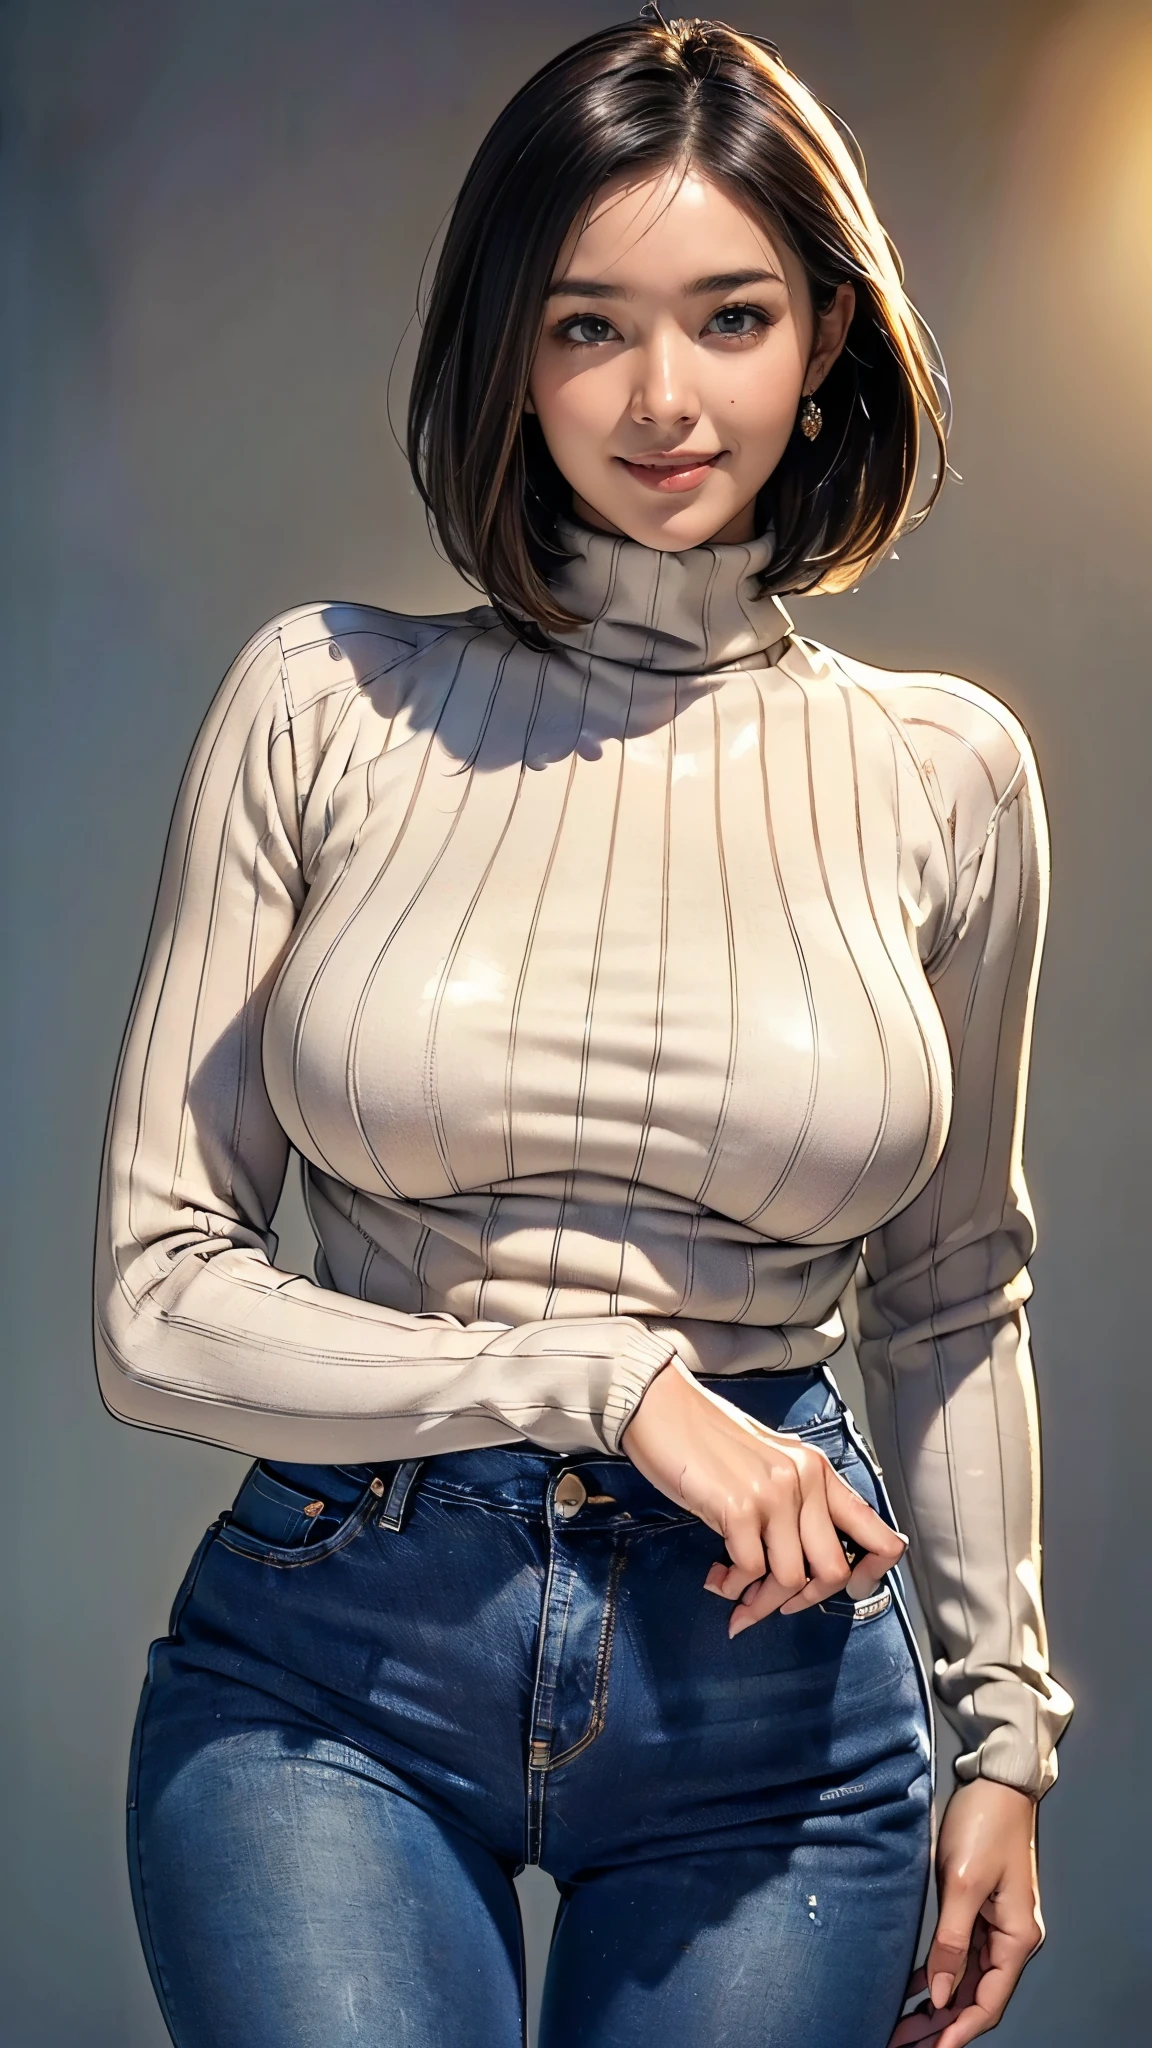 (1 girl:1.5),(50 years old:1.5),(Detailed body:1.4),(Beautiful Skin:1.4),(Japanese:1.5),((Turtleneck sweater that fits the body:1.5)),(No bra:1.2),((Wearing jeans:1.5)),(front:1.5),BREAK(Looking at me:1.5),((Fine skin:1.4)),(Shiny skin:1.5),(Beautiful Face:1.5),(Detailed hand drawing:1.3),(Beautiful female hands:1.3),(smile:1.5),(short hair),BREAK(Big Breasts:1.5),(Blurred Background:1.5),(Very sensual:1.5),(sexy:1.5),((Thick thighs:1.5)),(Beautiful body:1.5),((Very sensual:1.5)),BREAK(((masterpiece:1.5),(highest quality:1.5),(Very detailed:1.5),(High resolution:1.5),(Realistic:1.5),(Realistic:1.5),(Delicate depiction),(Careful depiction))),8k,wallpaper